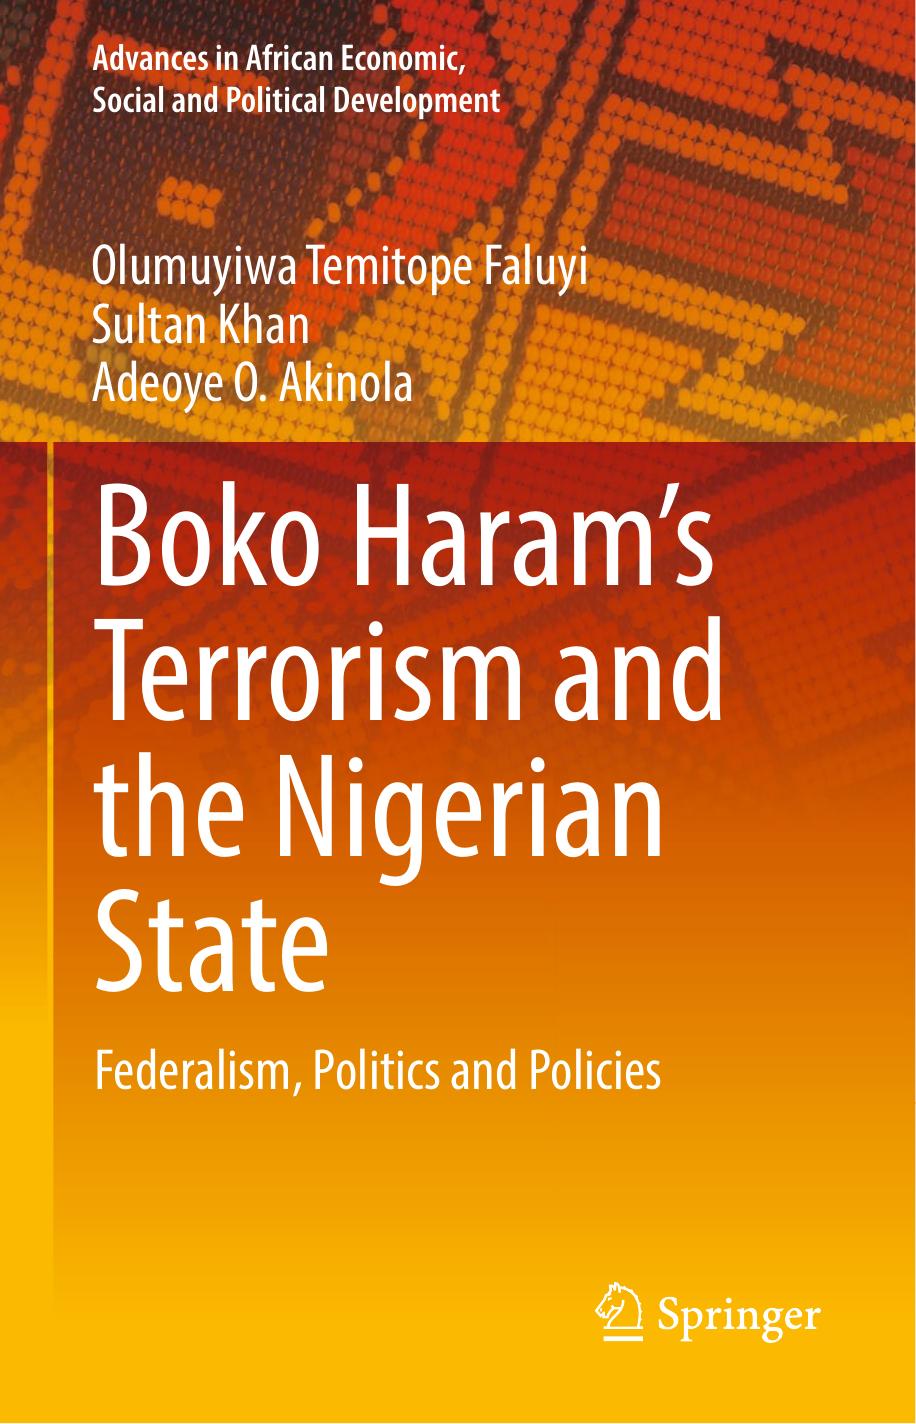 Boko Haram’s Terrorism and the Nigerian State Federalism, Politics and Policies 2019 PDF